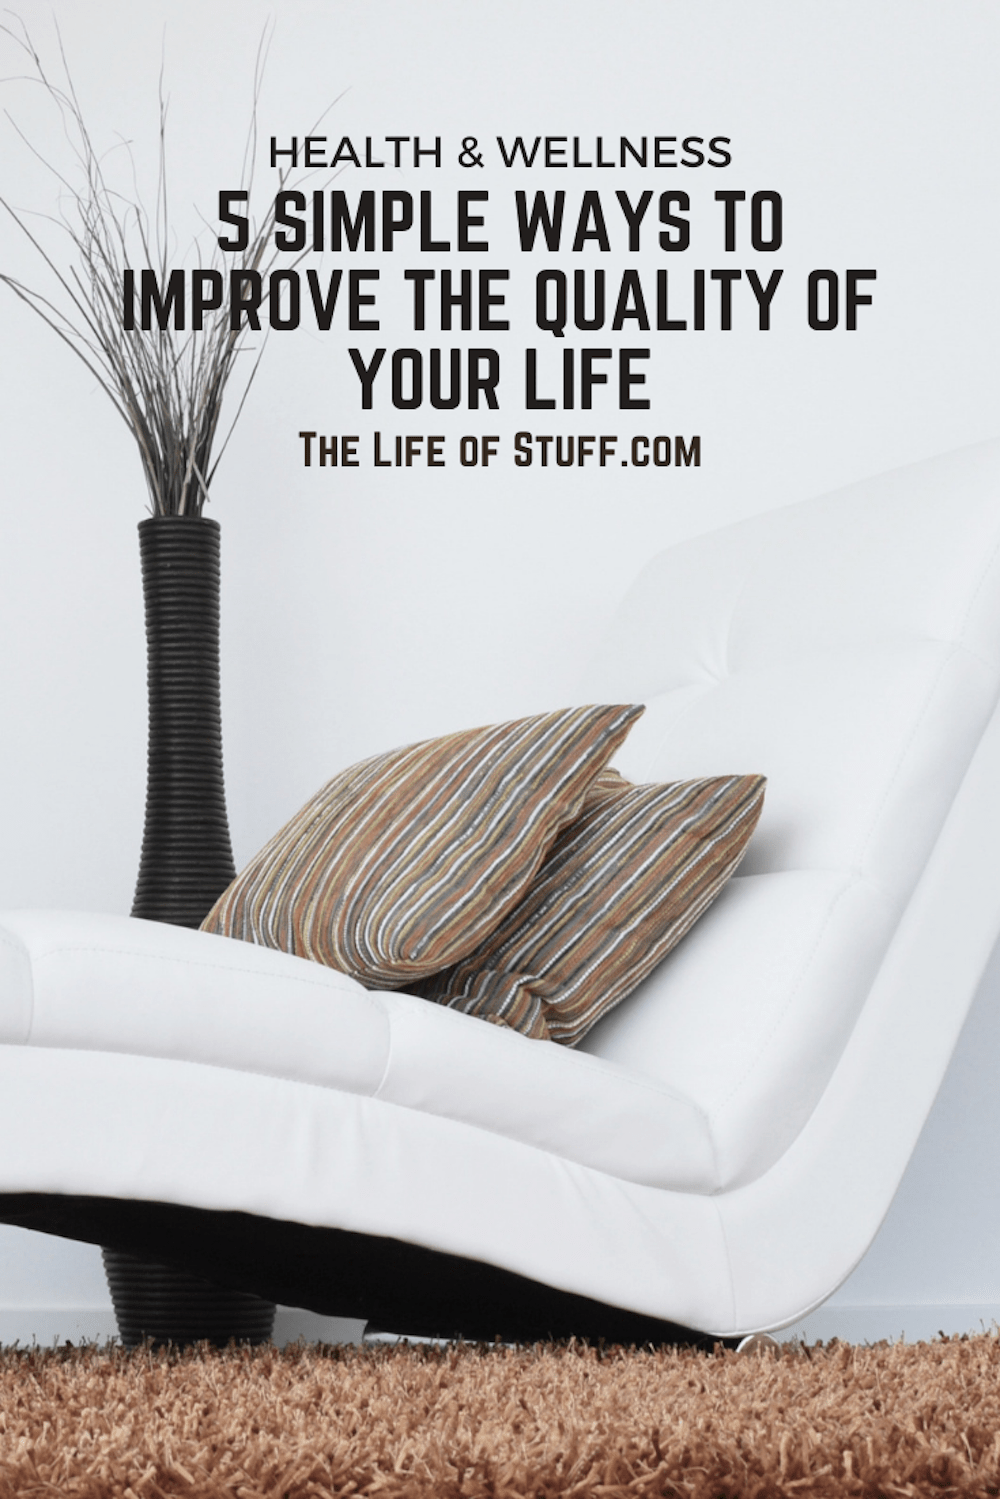 5 Simple Ways To Improve the Quality of Your Life - The Life of Stuff